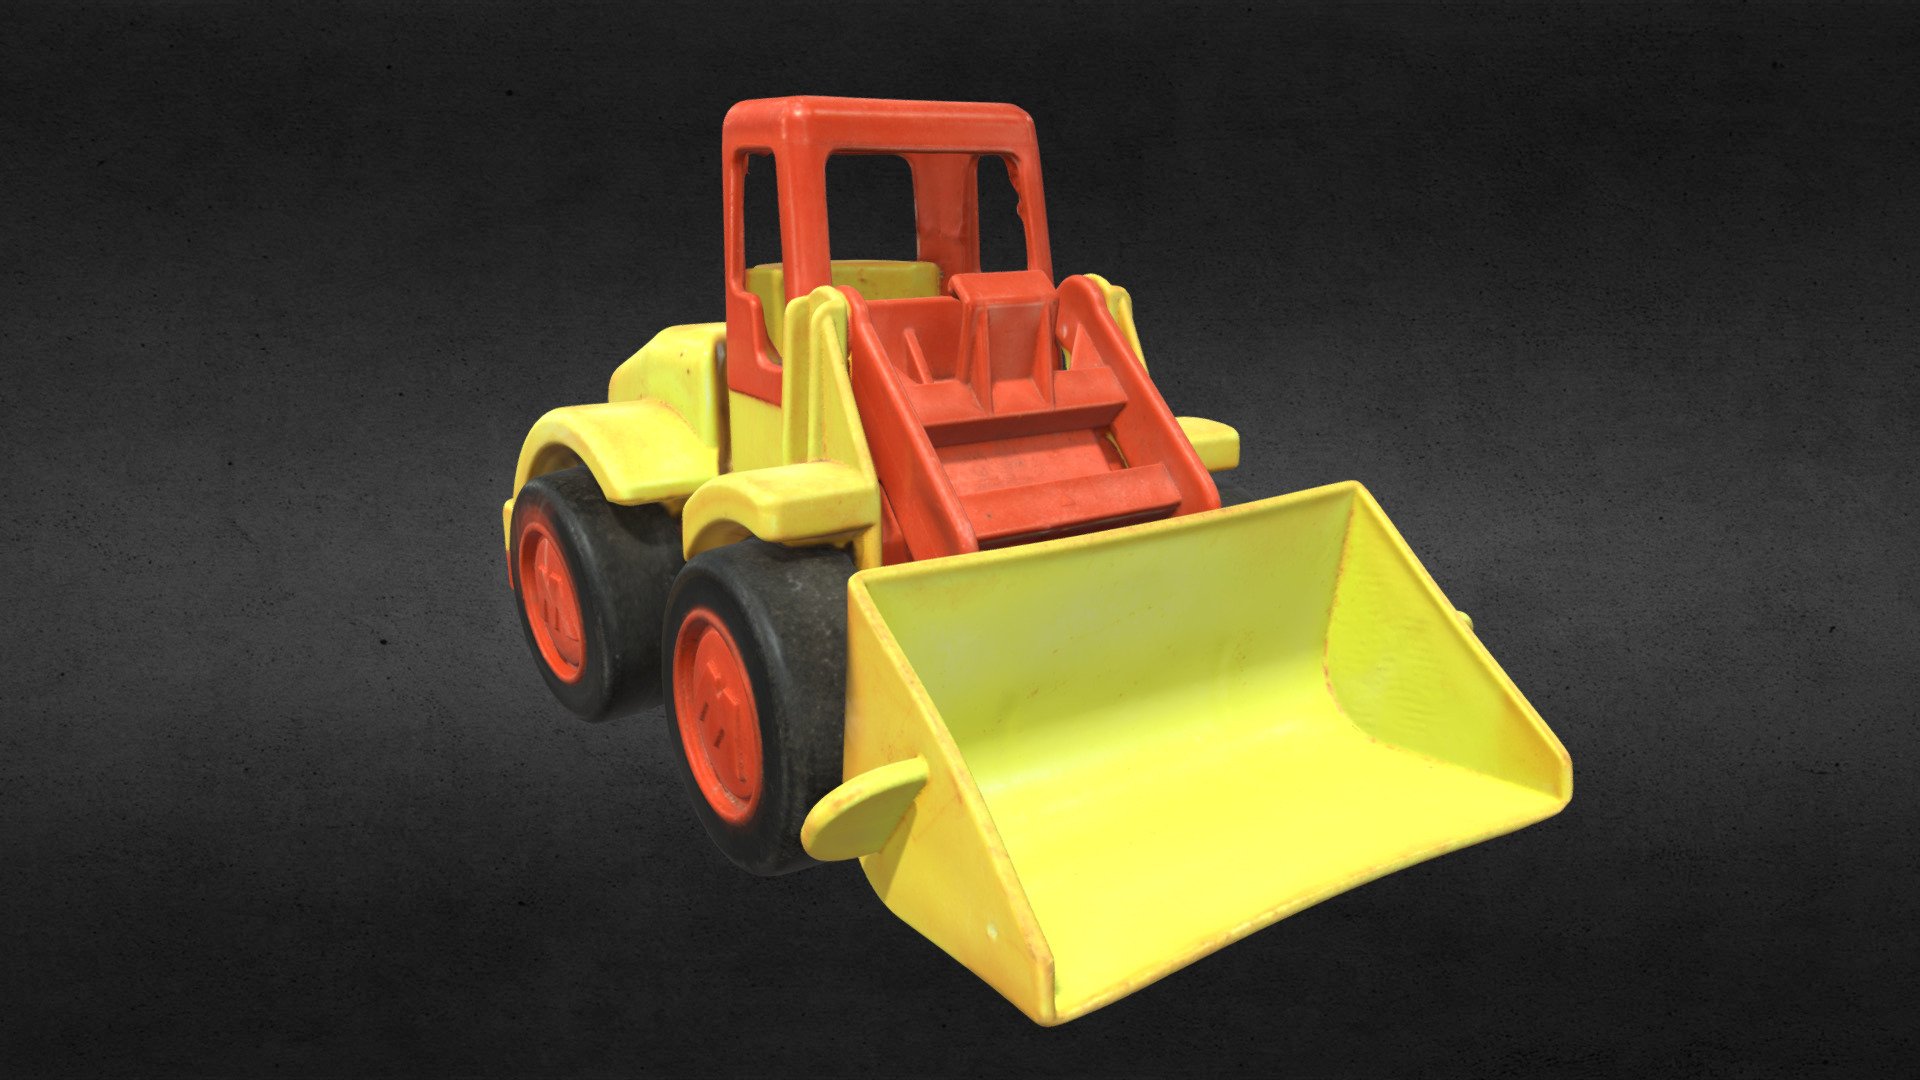 Toy articulated loader

Has seen a lot of beaches and has worked hard but as kids grow up they no longer play with it so it has to go 3d model